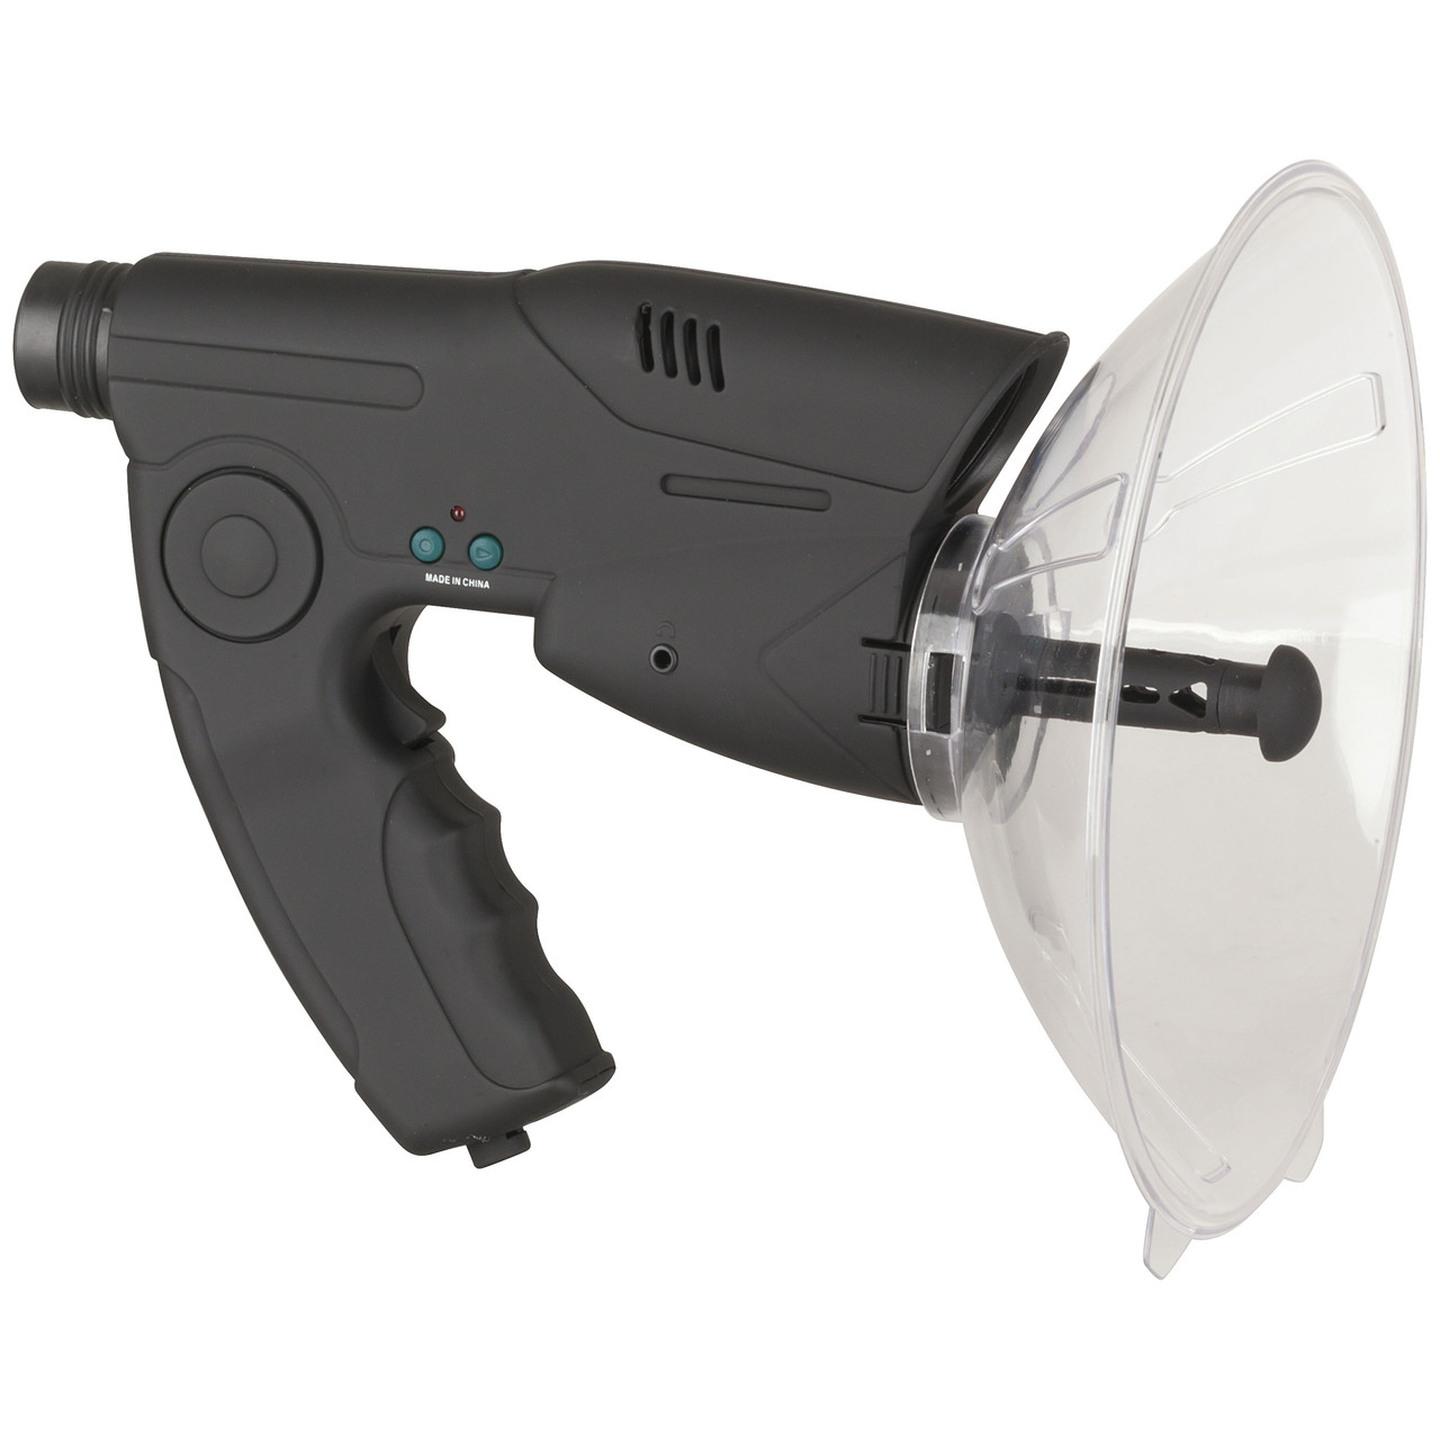 Spy Parabolic Microphone with Recorder and 8x Magnifier